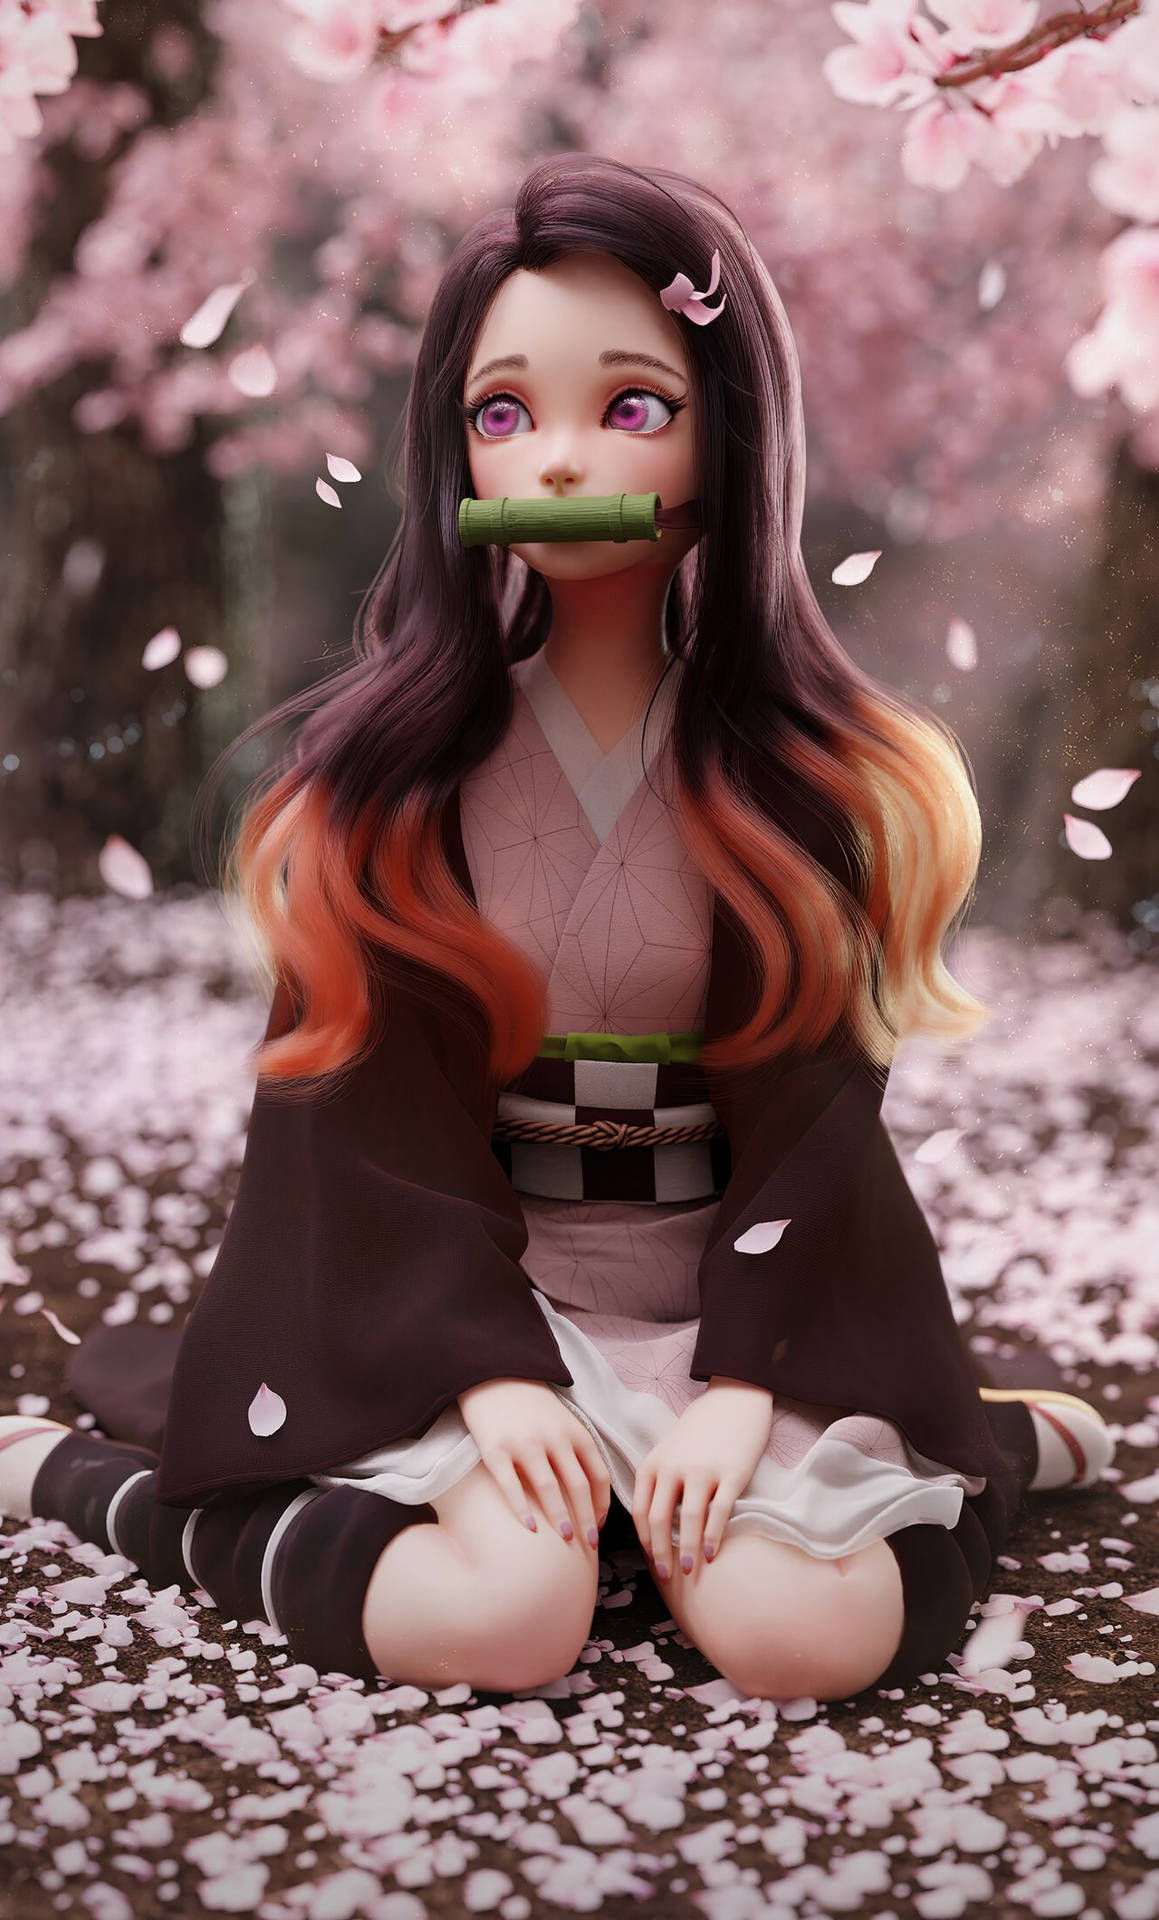 A Girl With Long Hair Sitting In A Field Of Cherry Blossoms Wallpaper